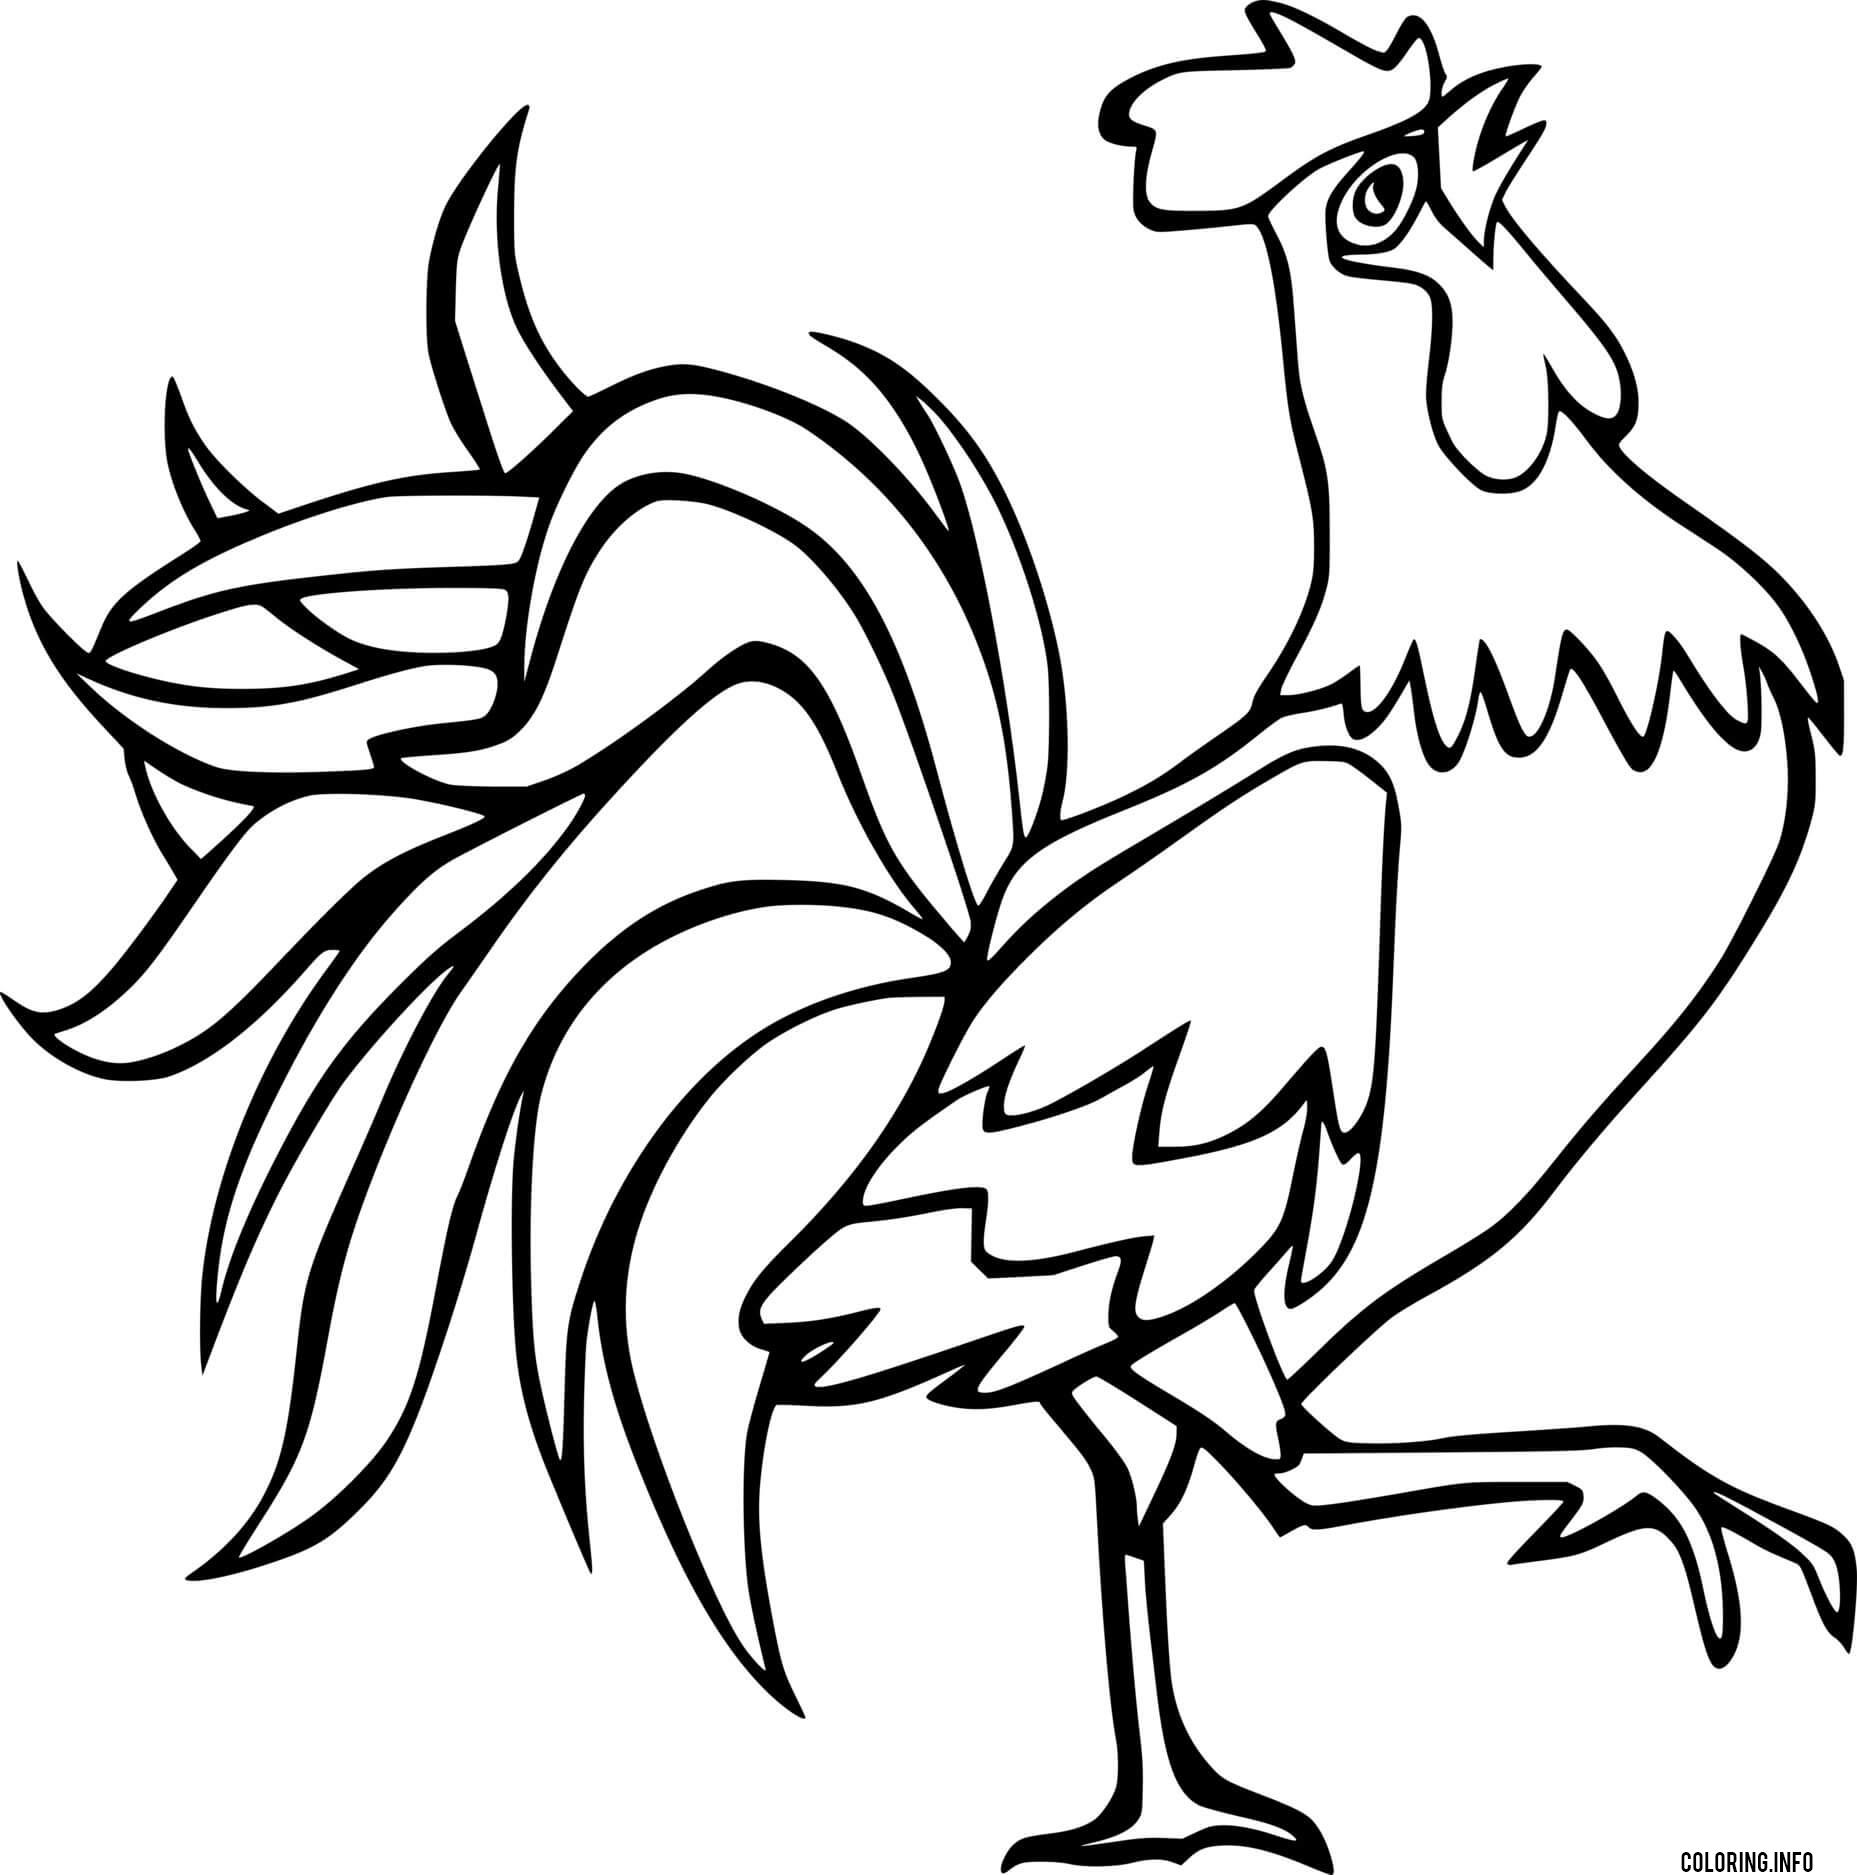 Easy walking rooster coloring page printable